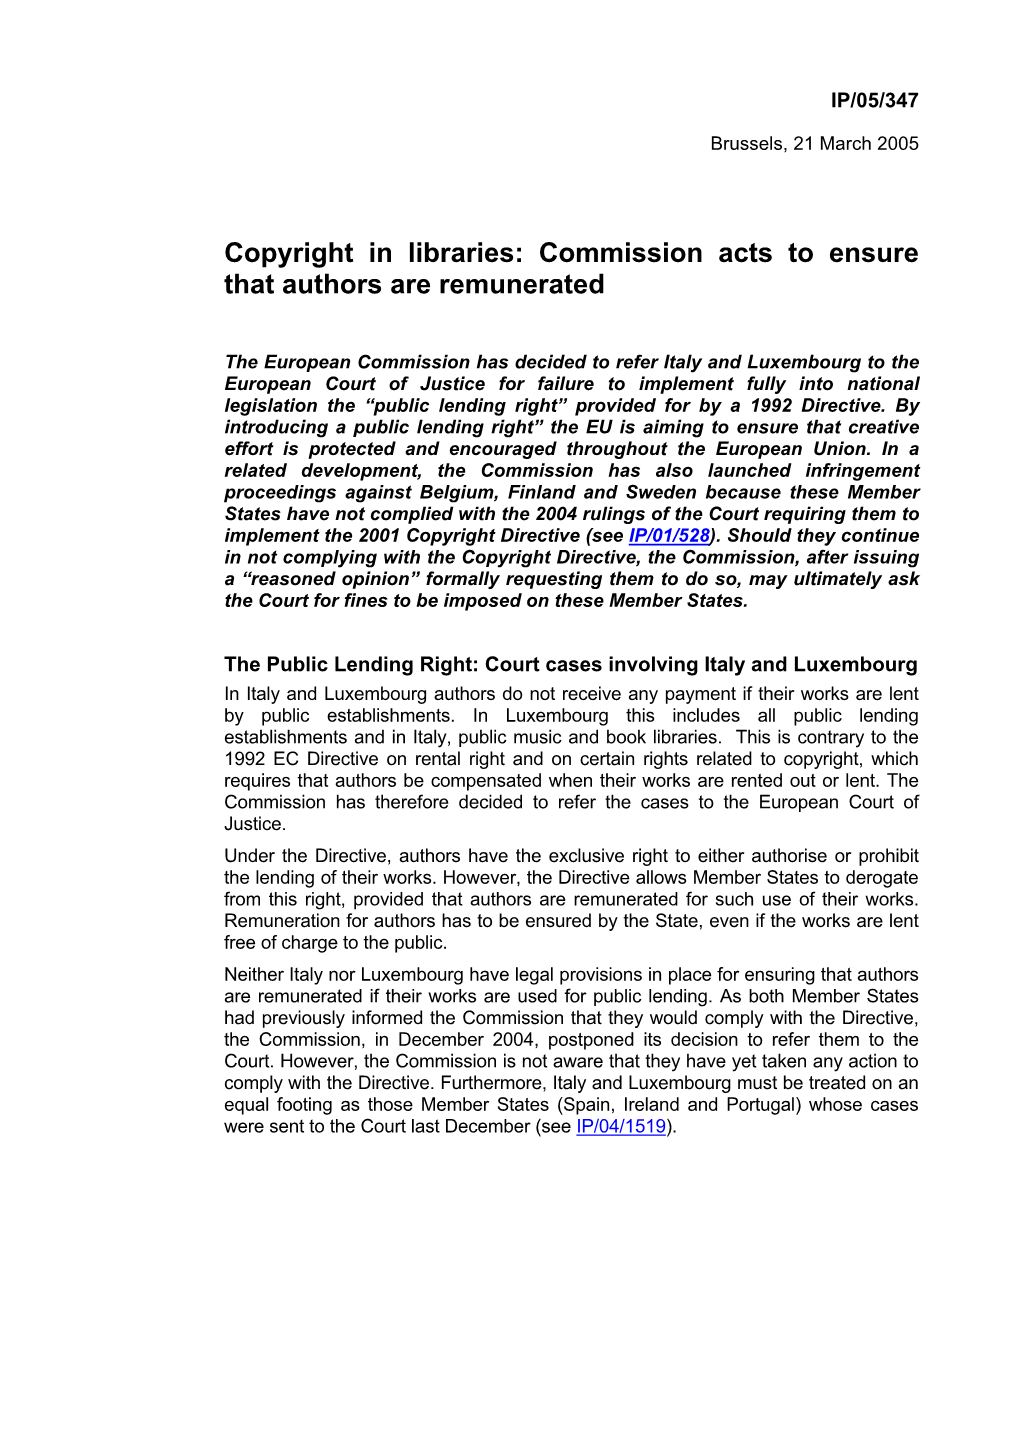 Copyright in Libraries: Commission Acts to Ensure That Authors Are Remunerated